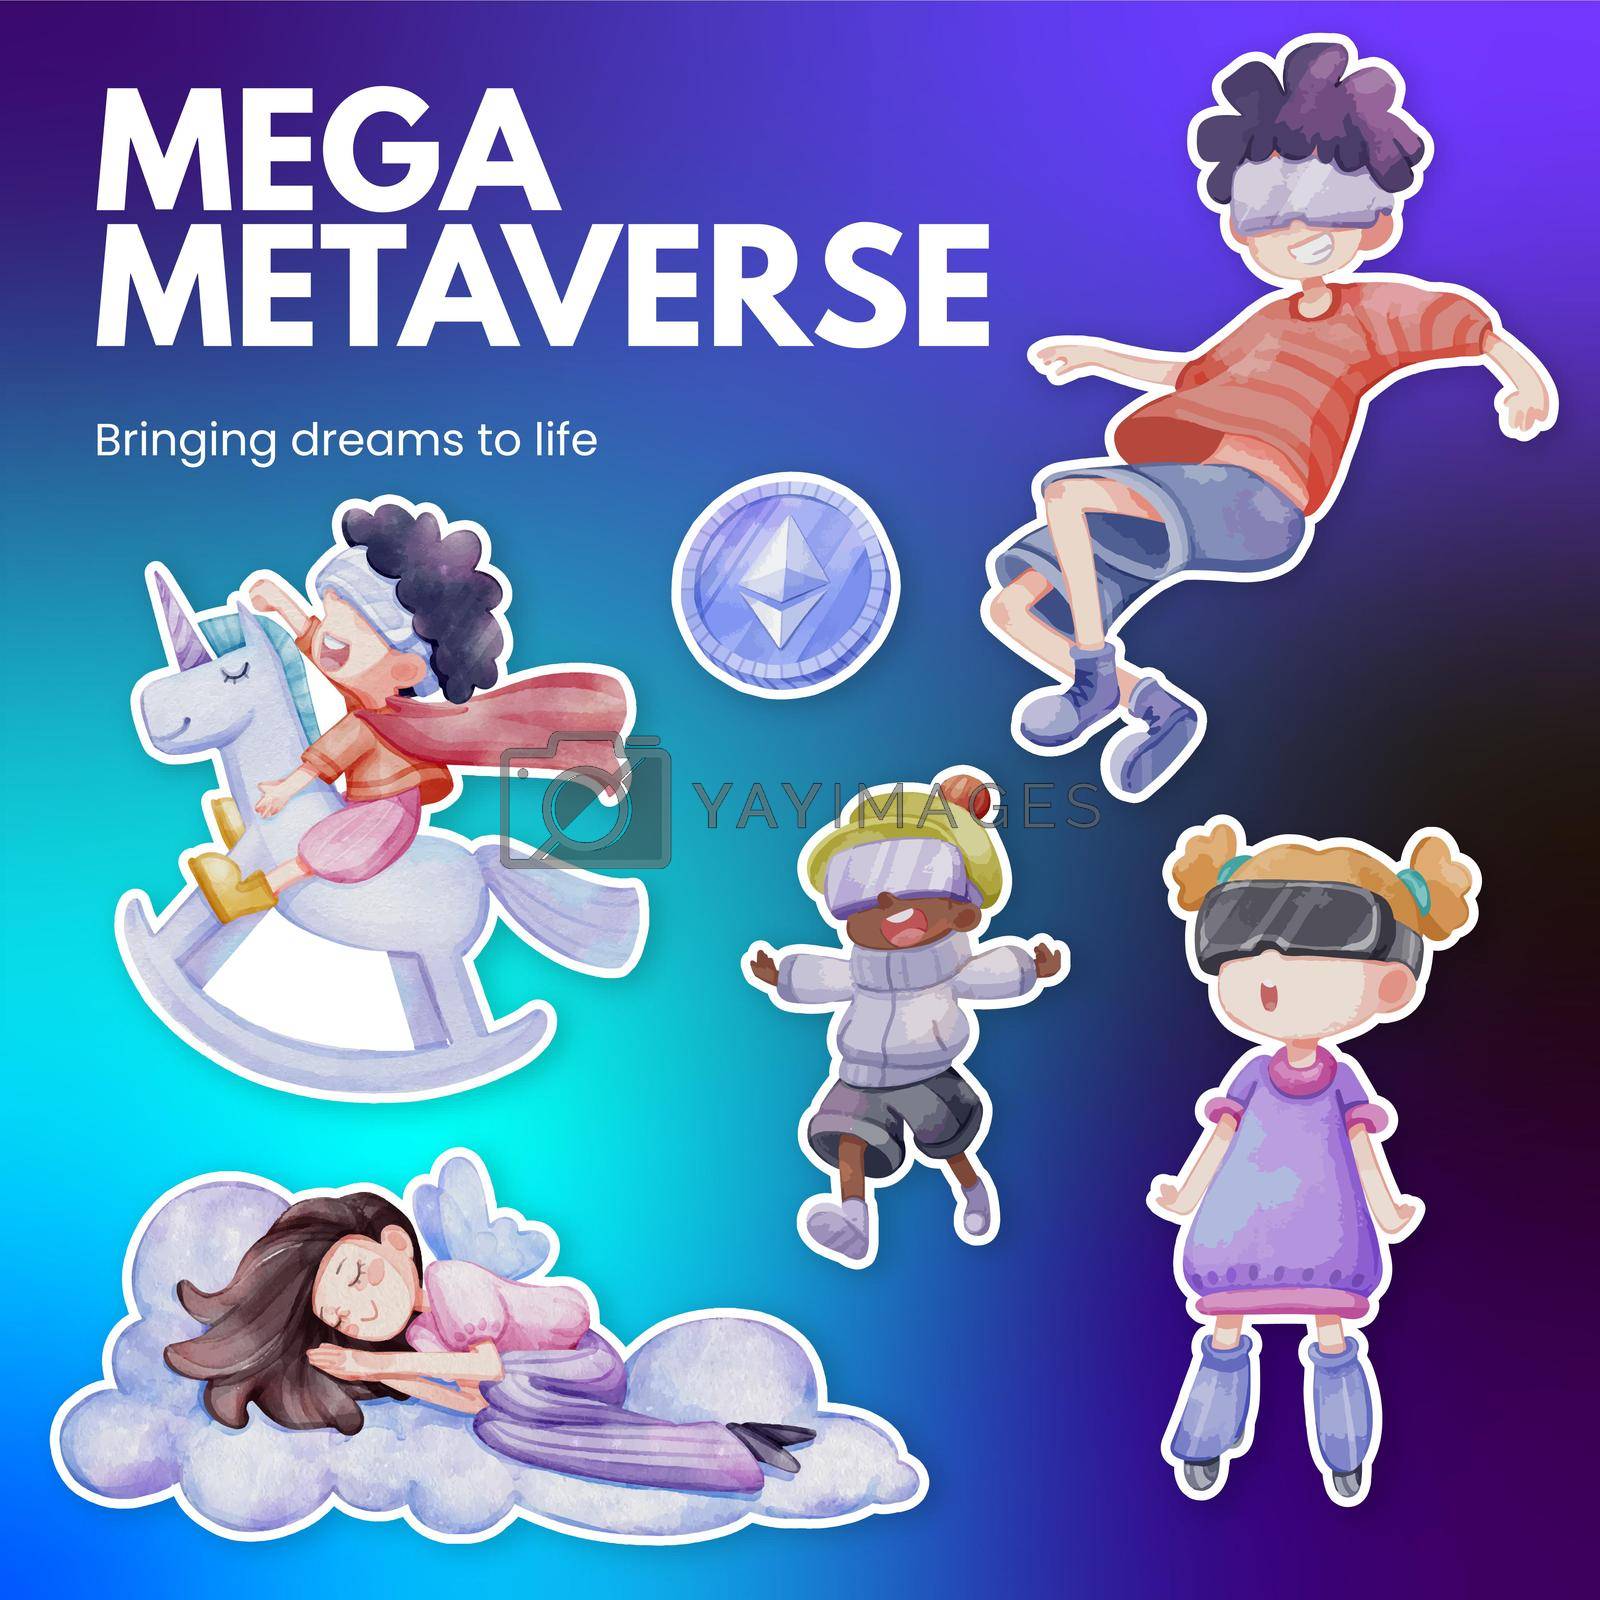 Sticker template with metaverse technology concept,watercolor style 
